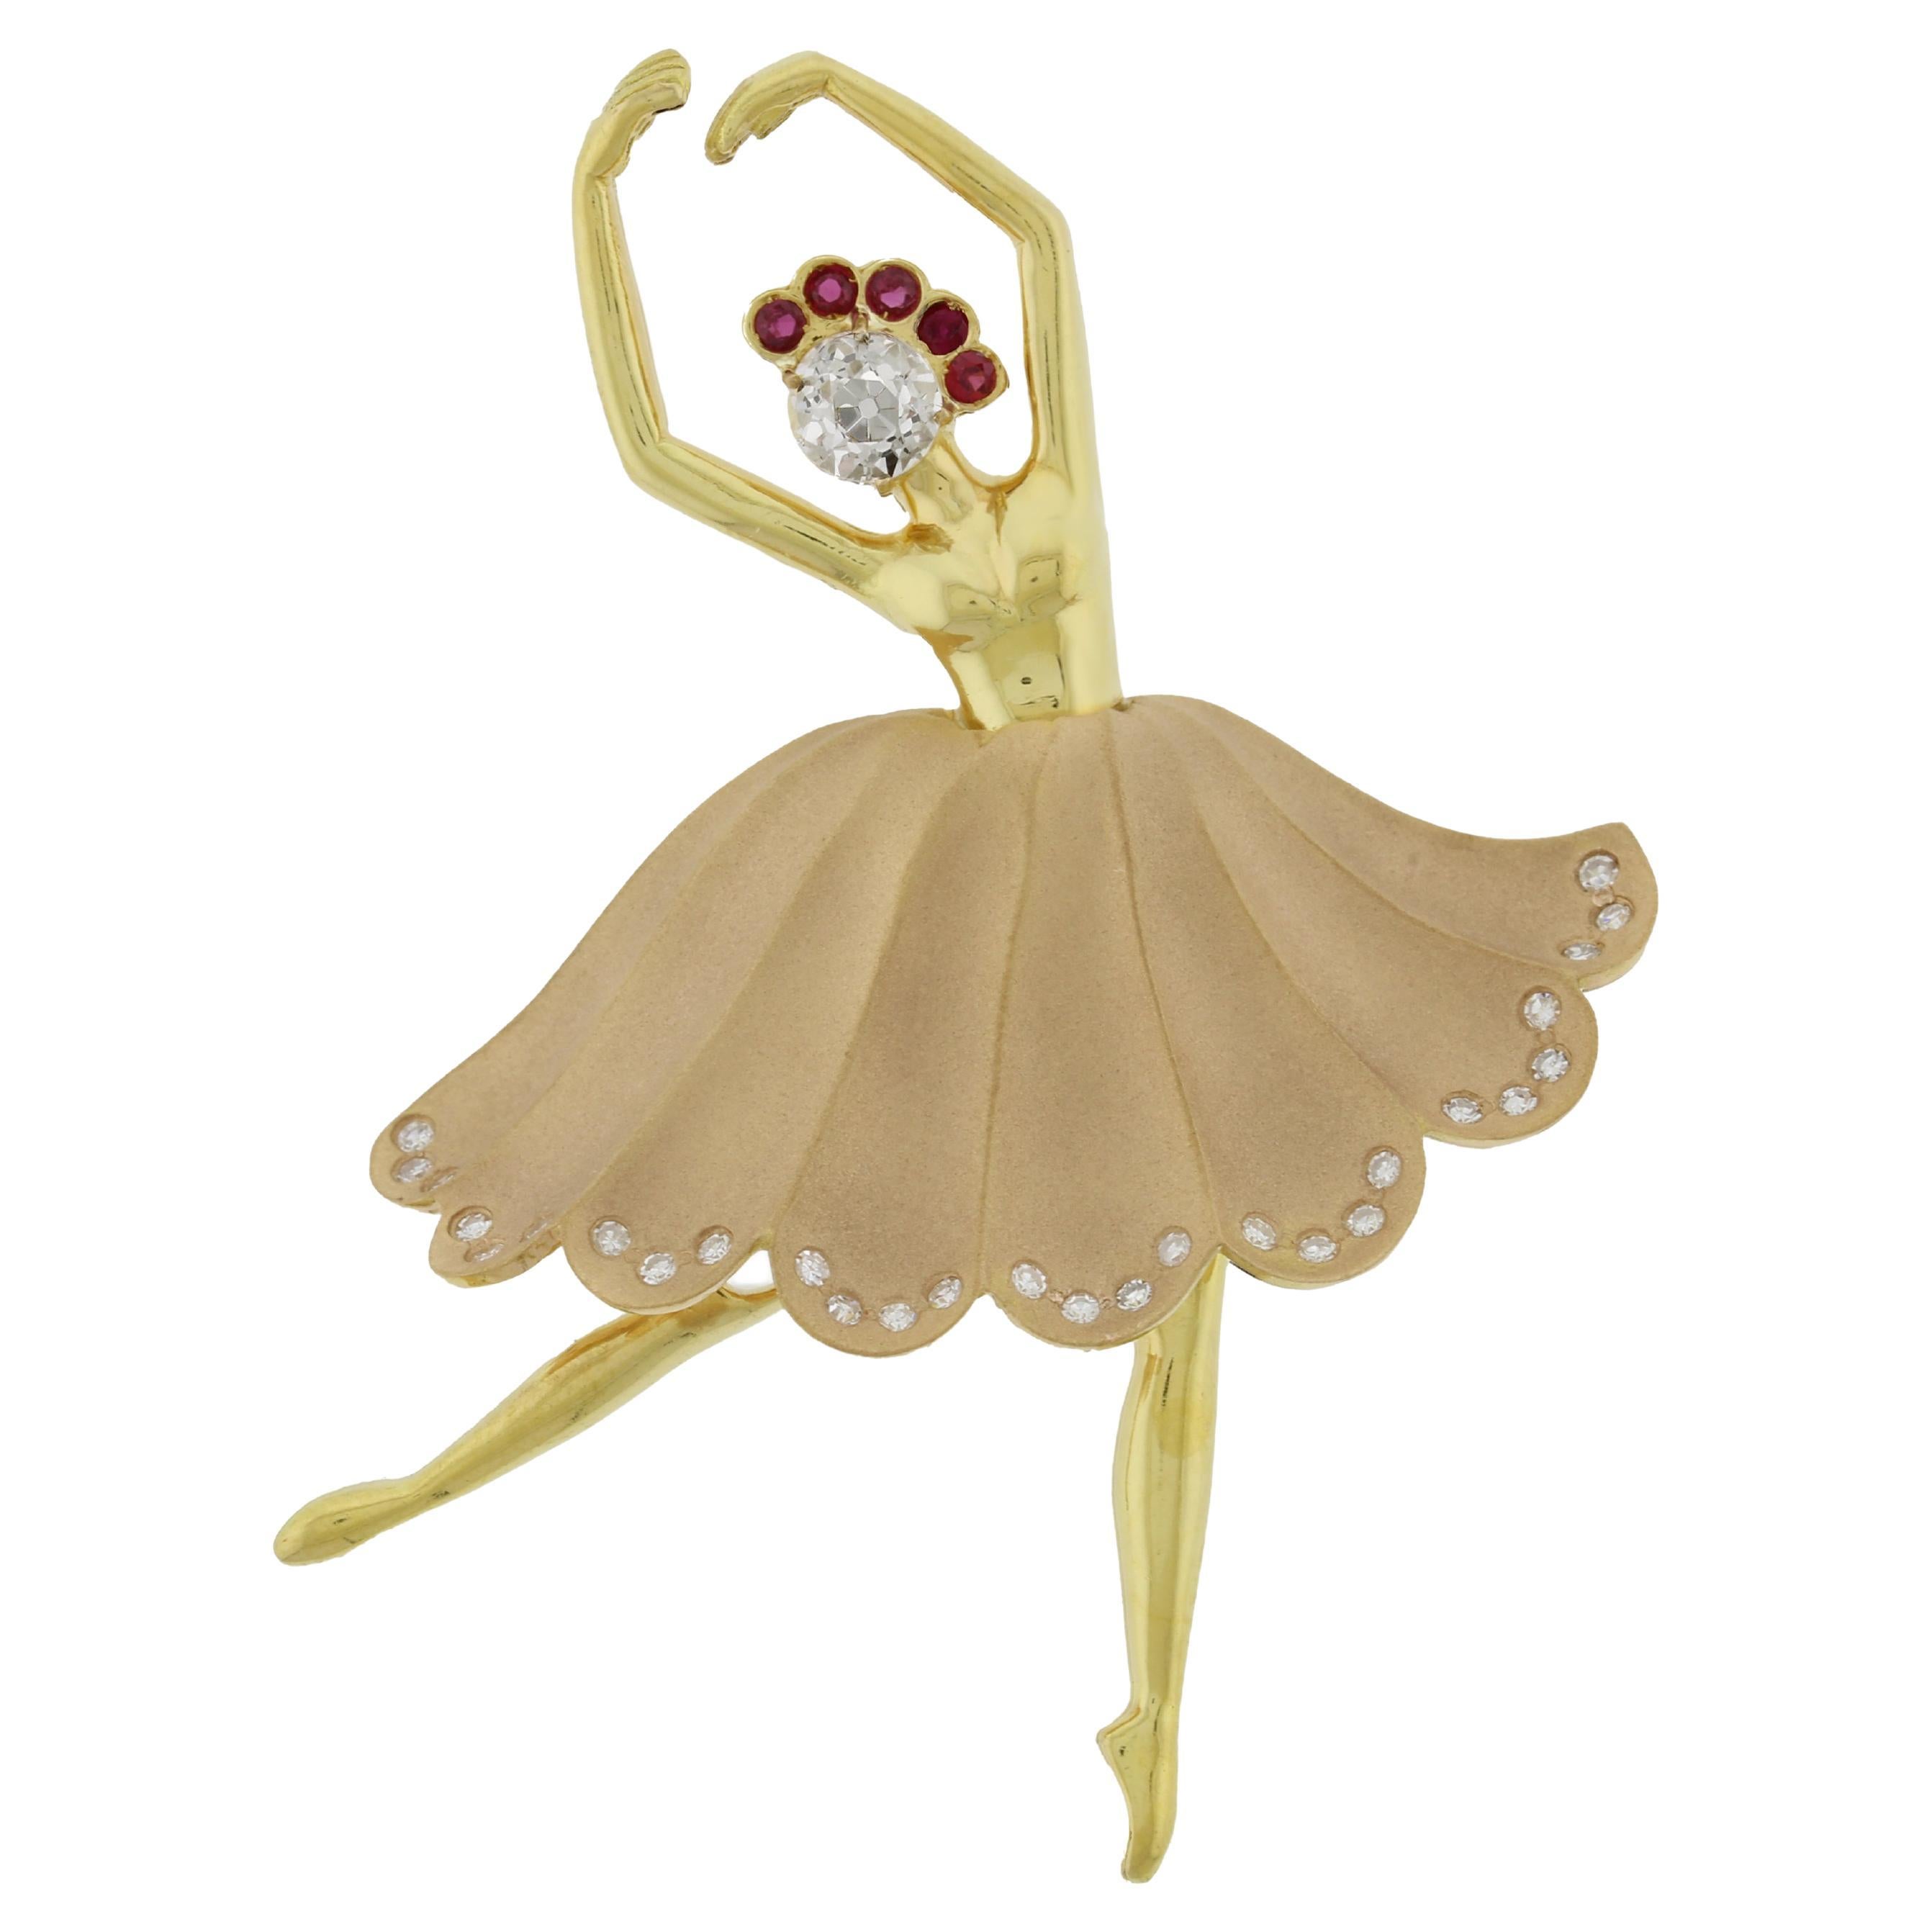 Diamond and Ruby Ballerina Brooch by Pampillonia Jewelers For Sale